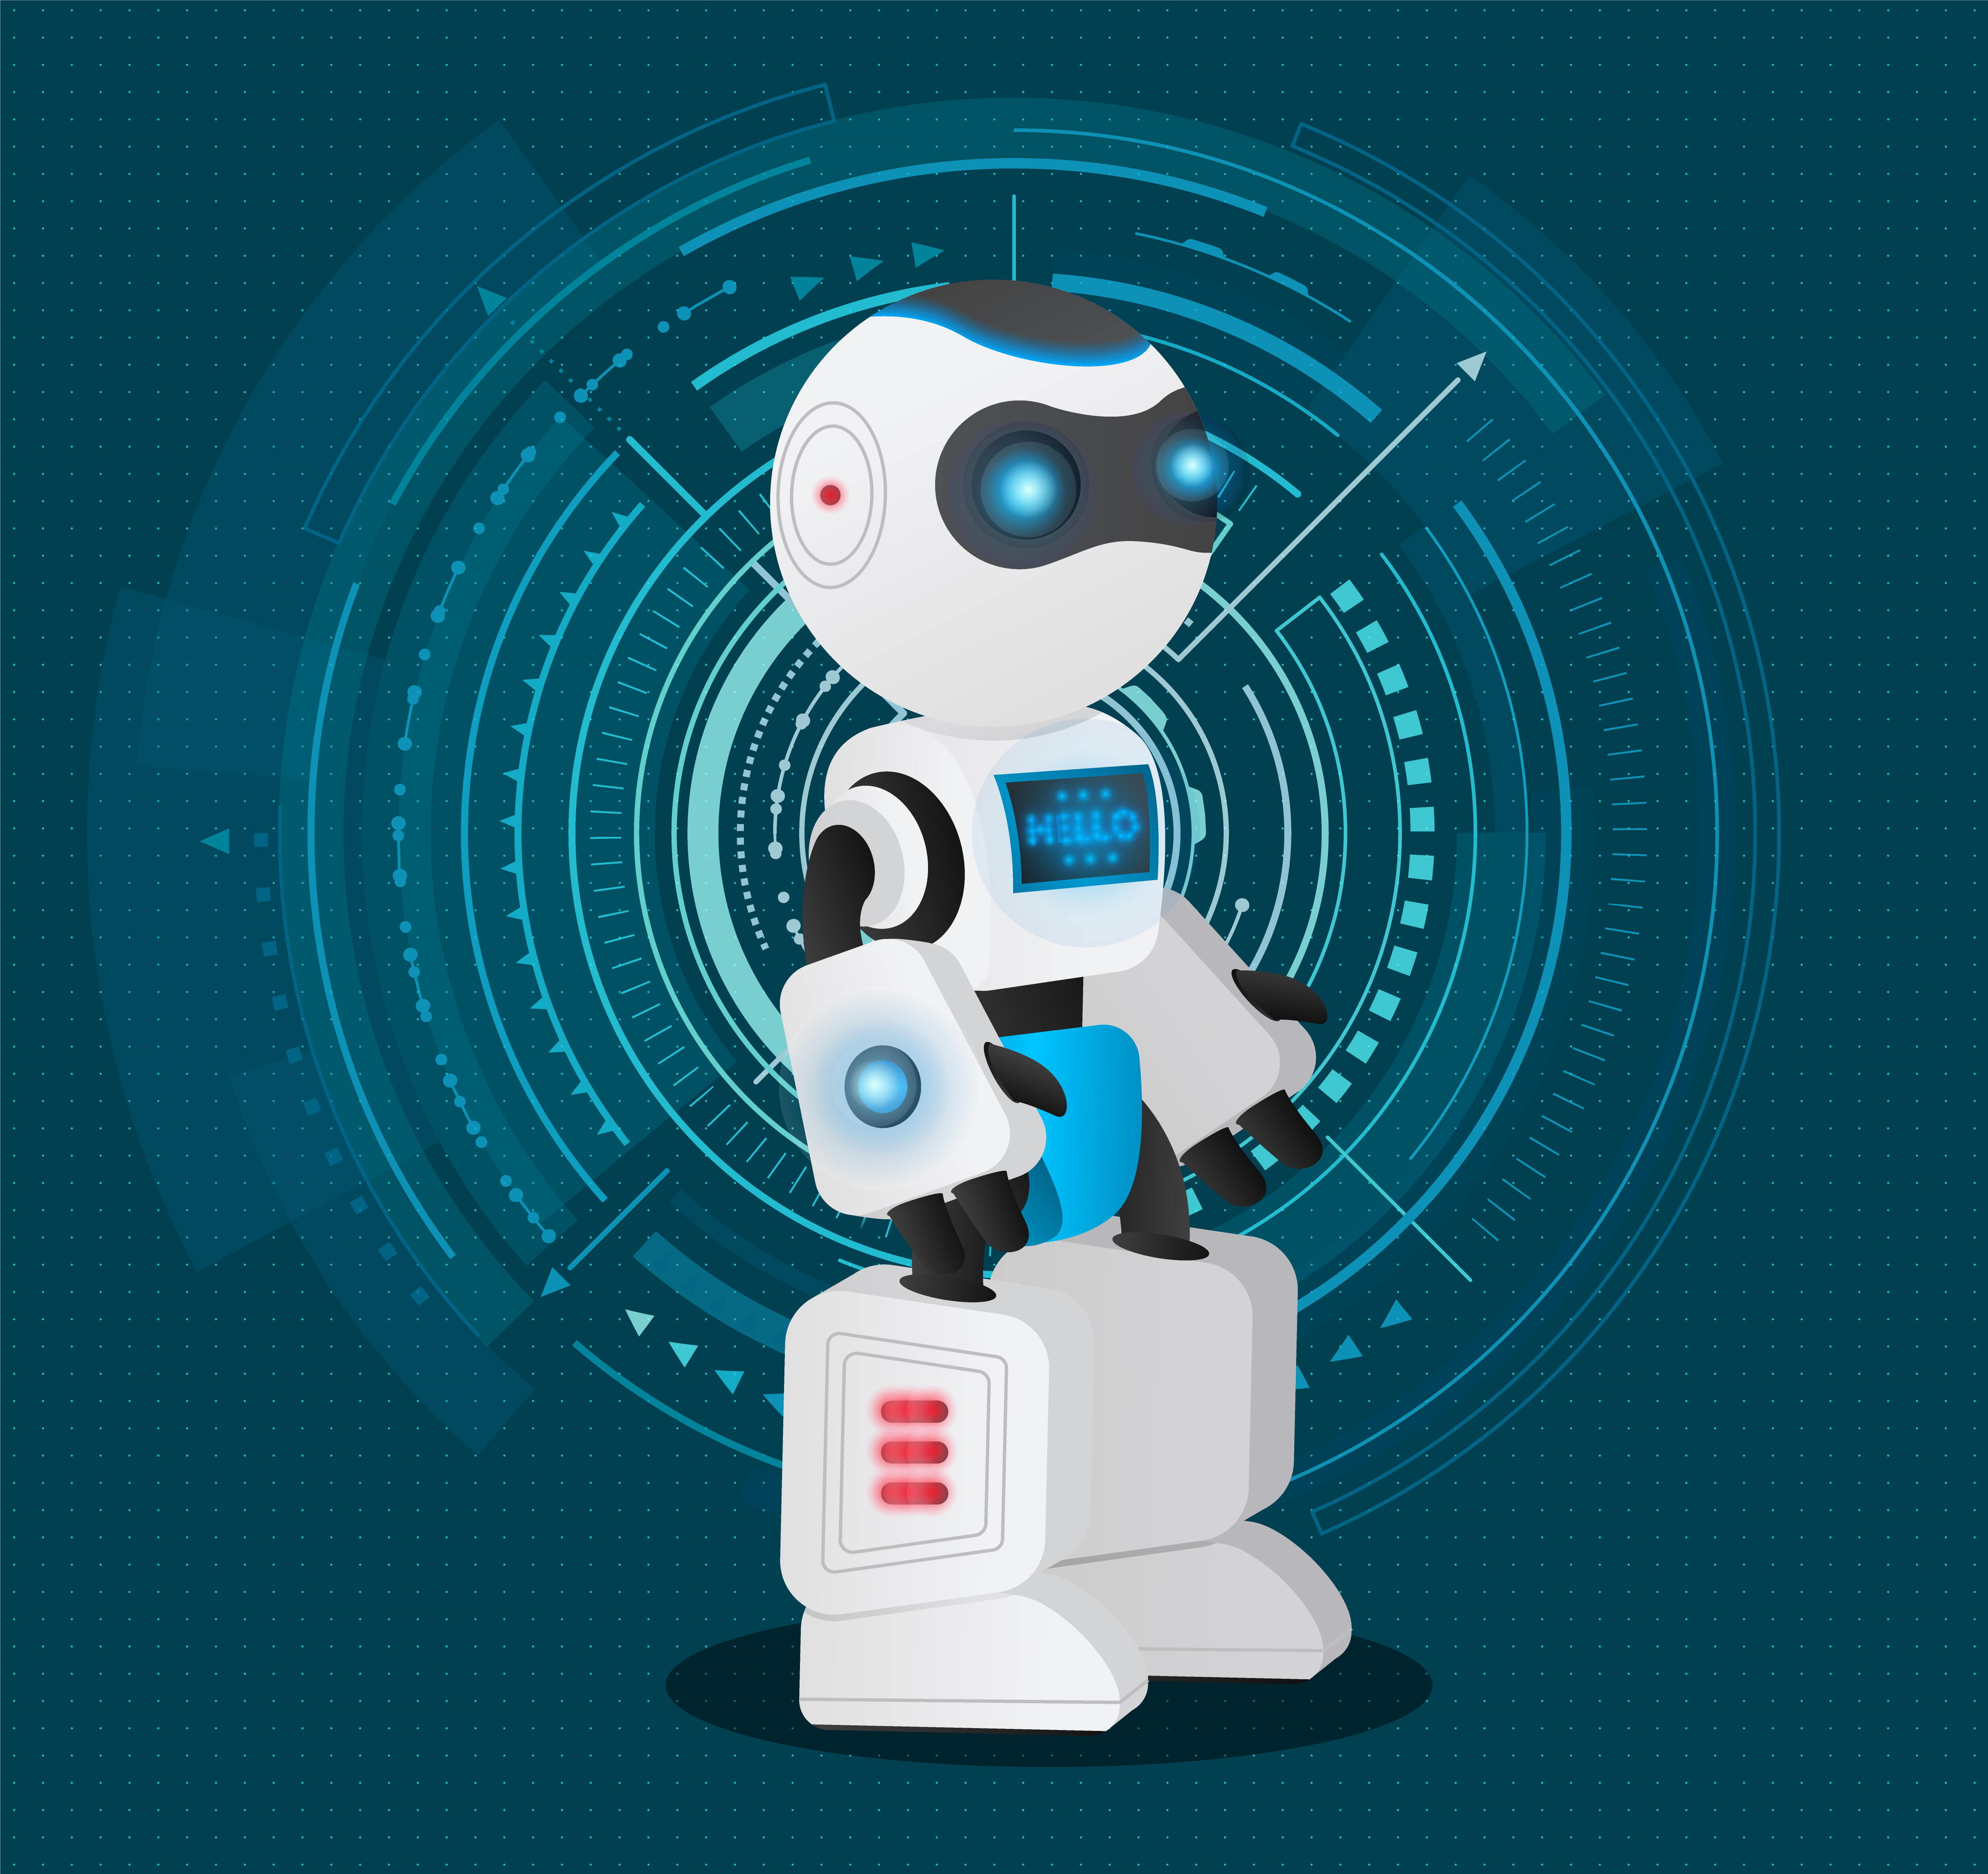 Artificial intelligence character stand in cyber space. Autonomous machine with humanlike interface. Robot capable to make decisions. Vector illustration of innovations and technologies in flat style. Artificial Intelligence, Futuristic Robot Machine